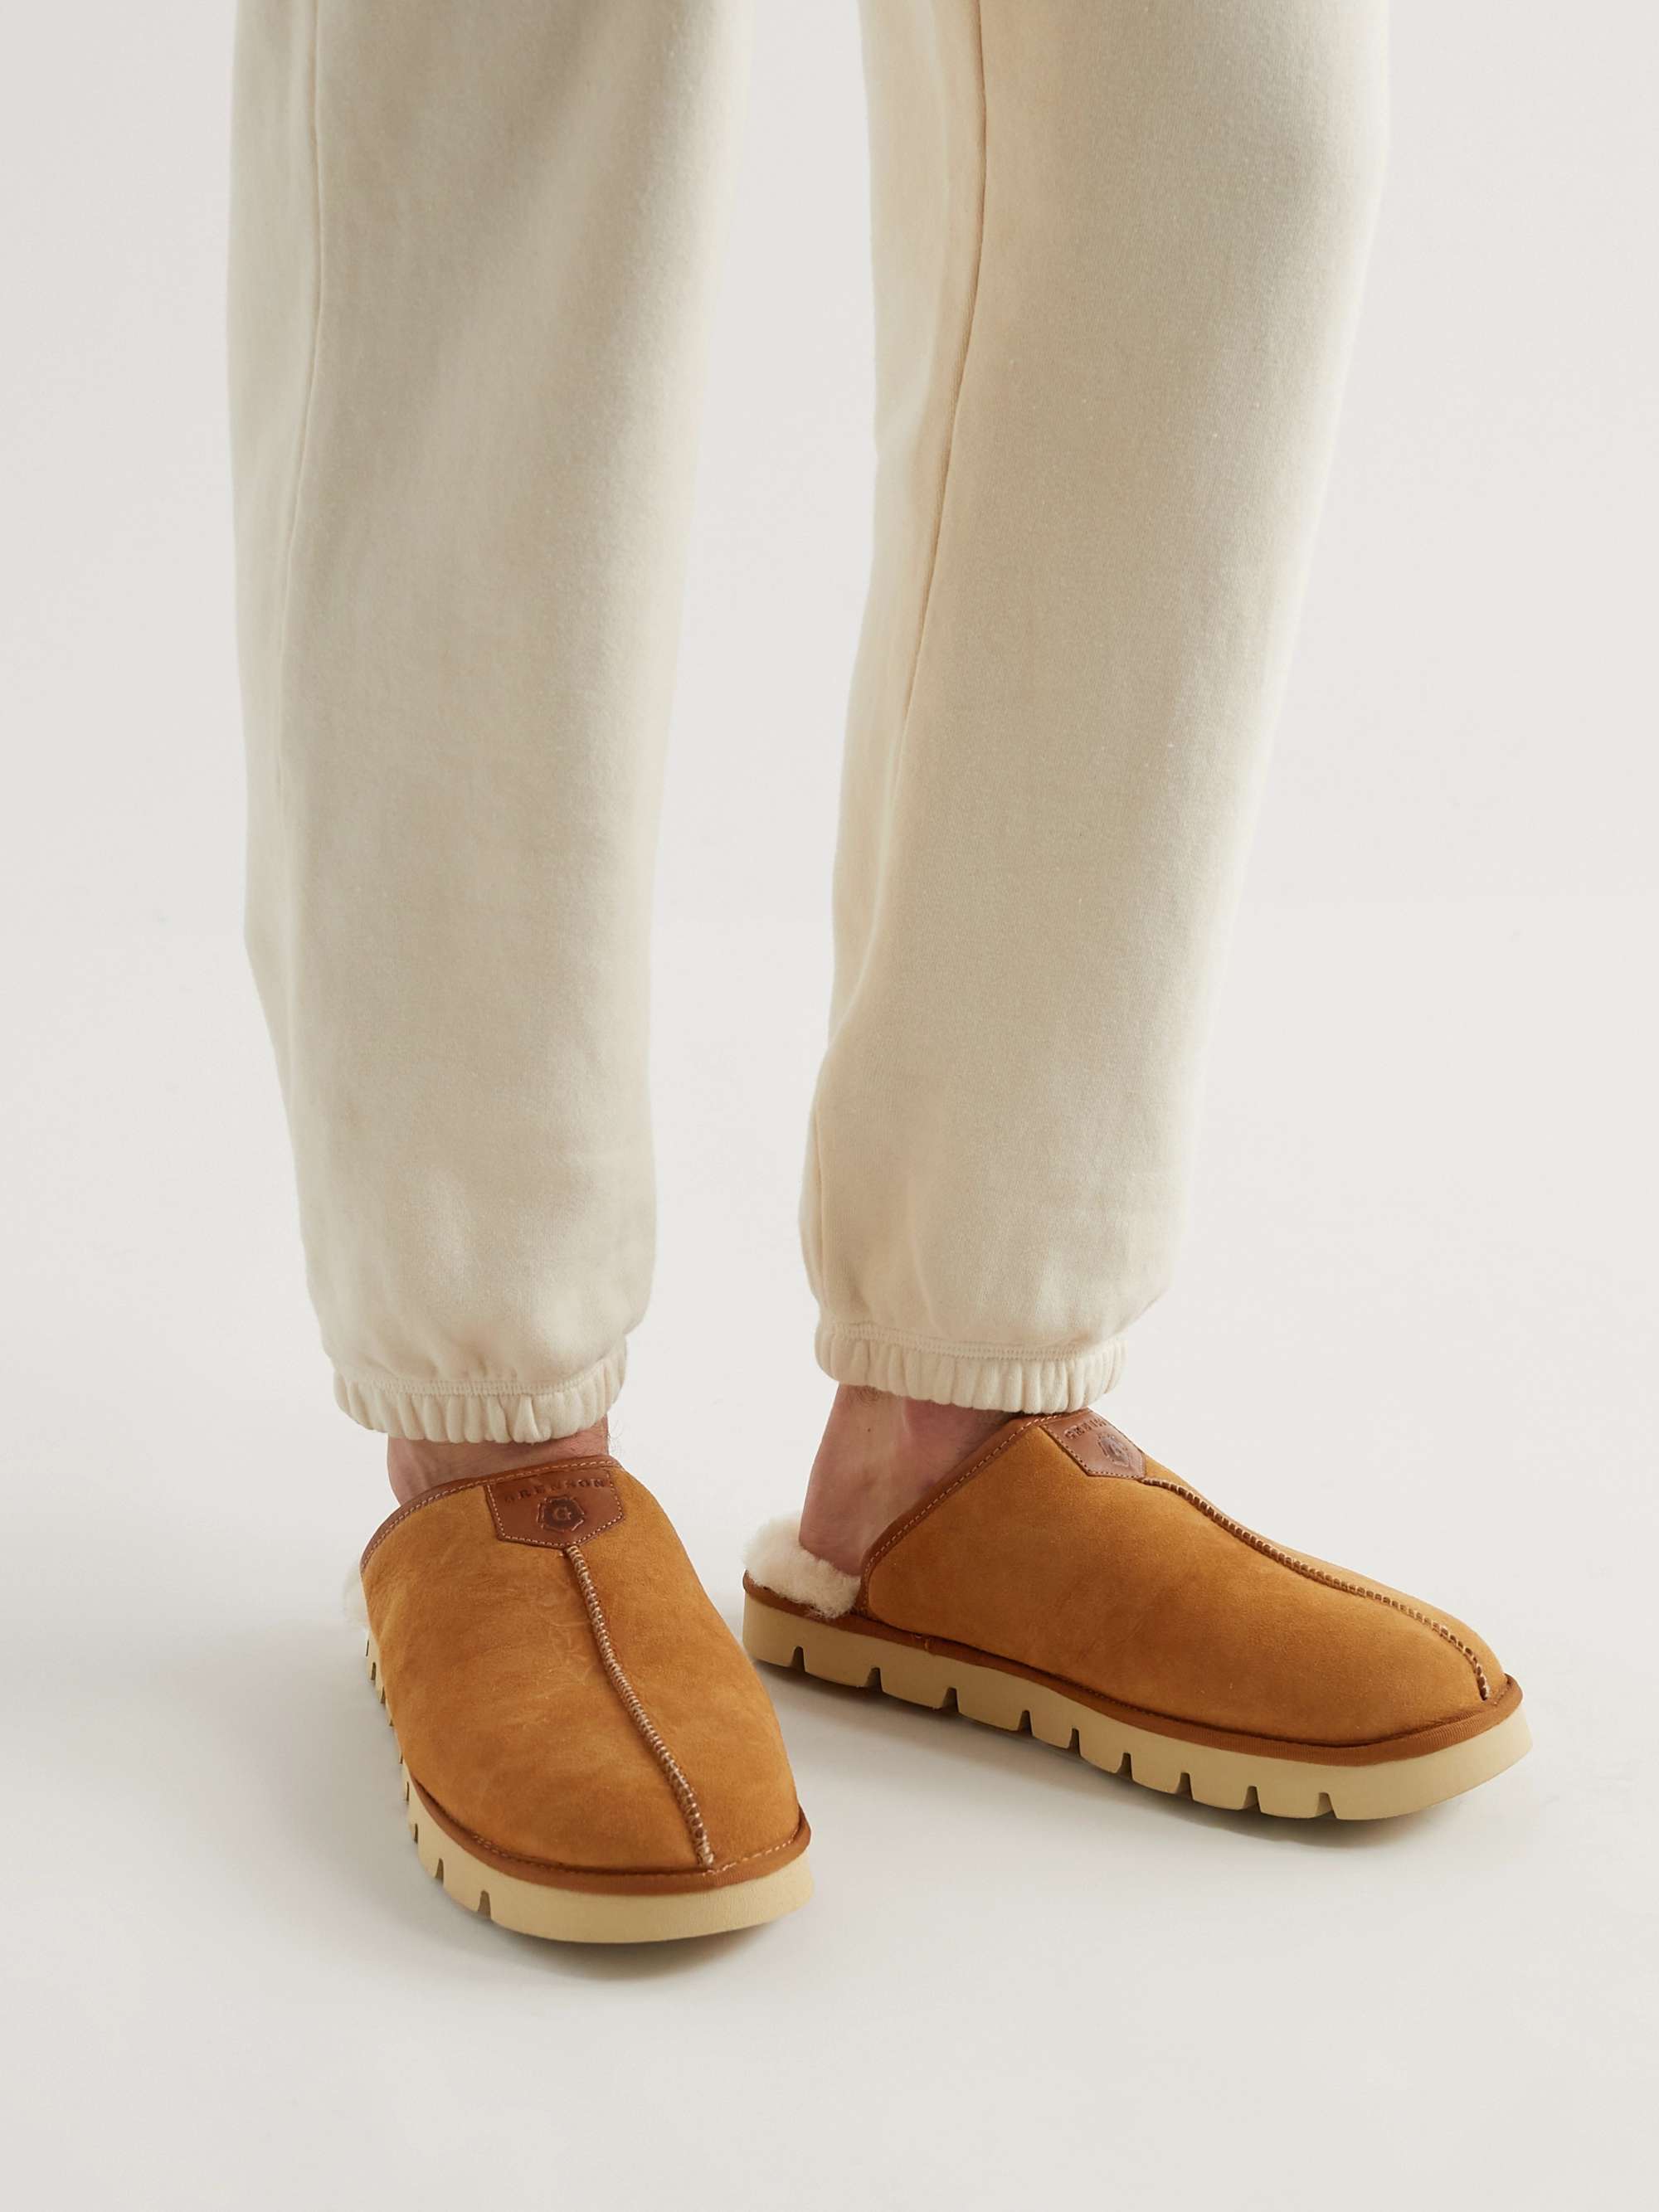 GRENSON Wainwright Shearling-Lined Suede Slippers